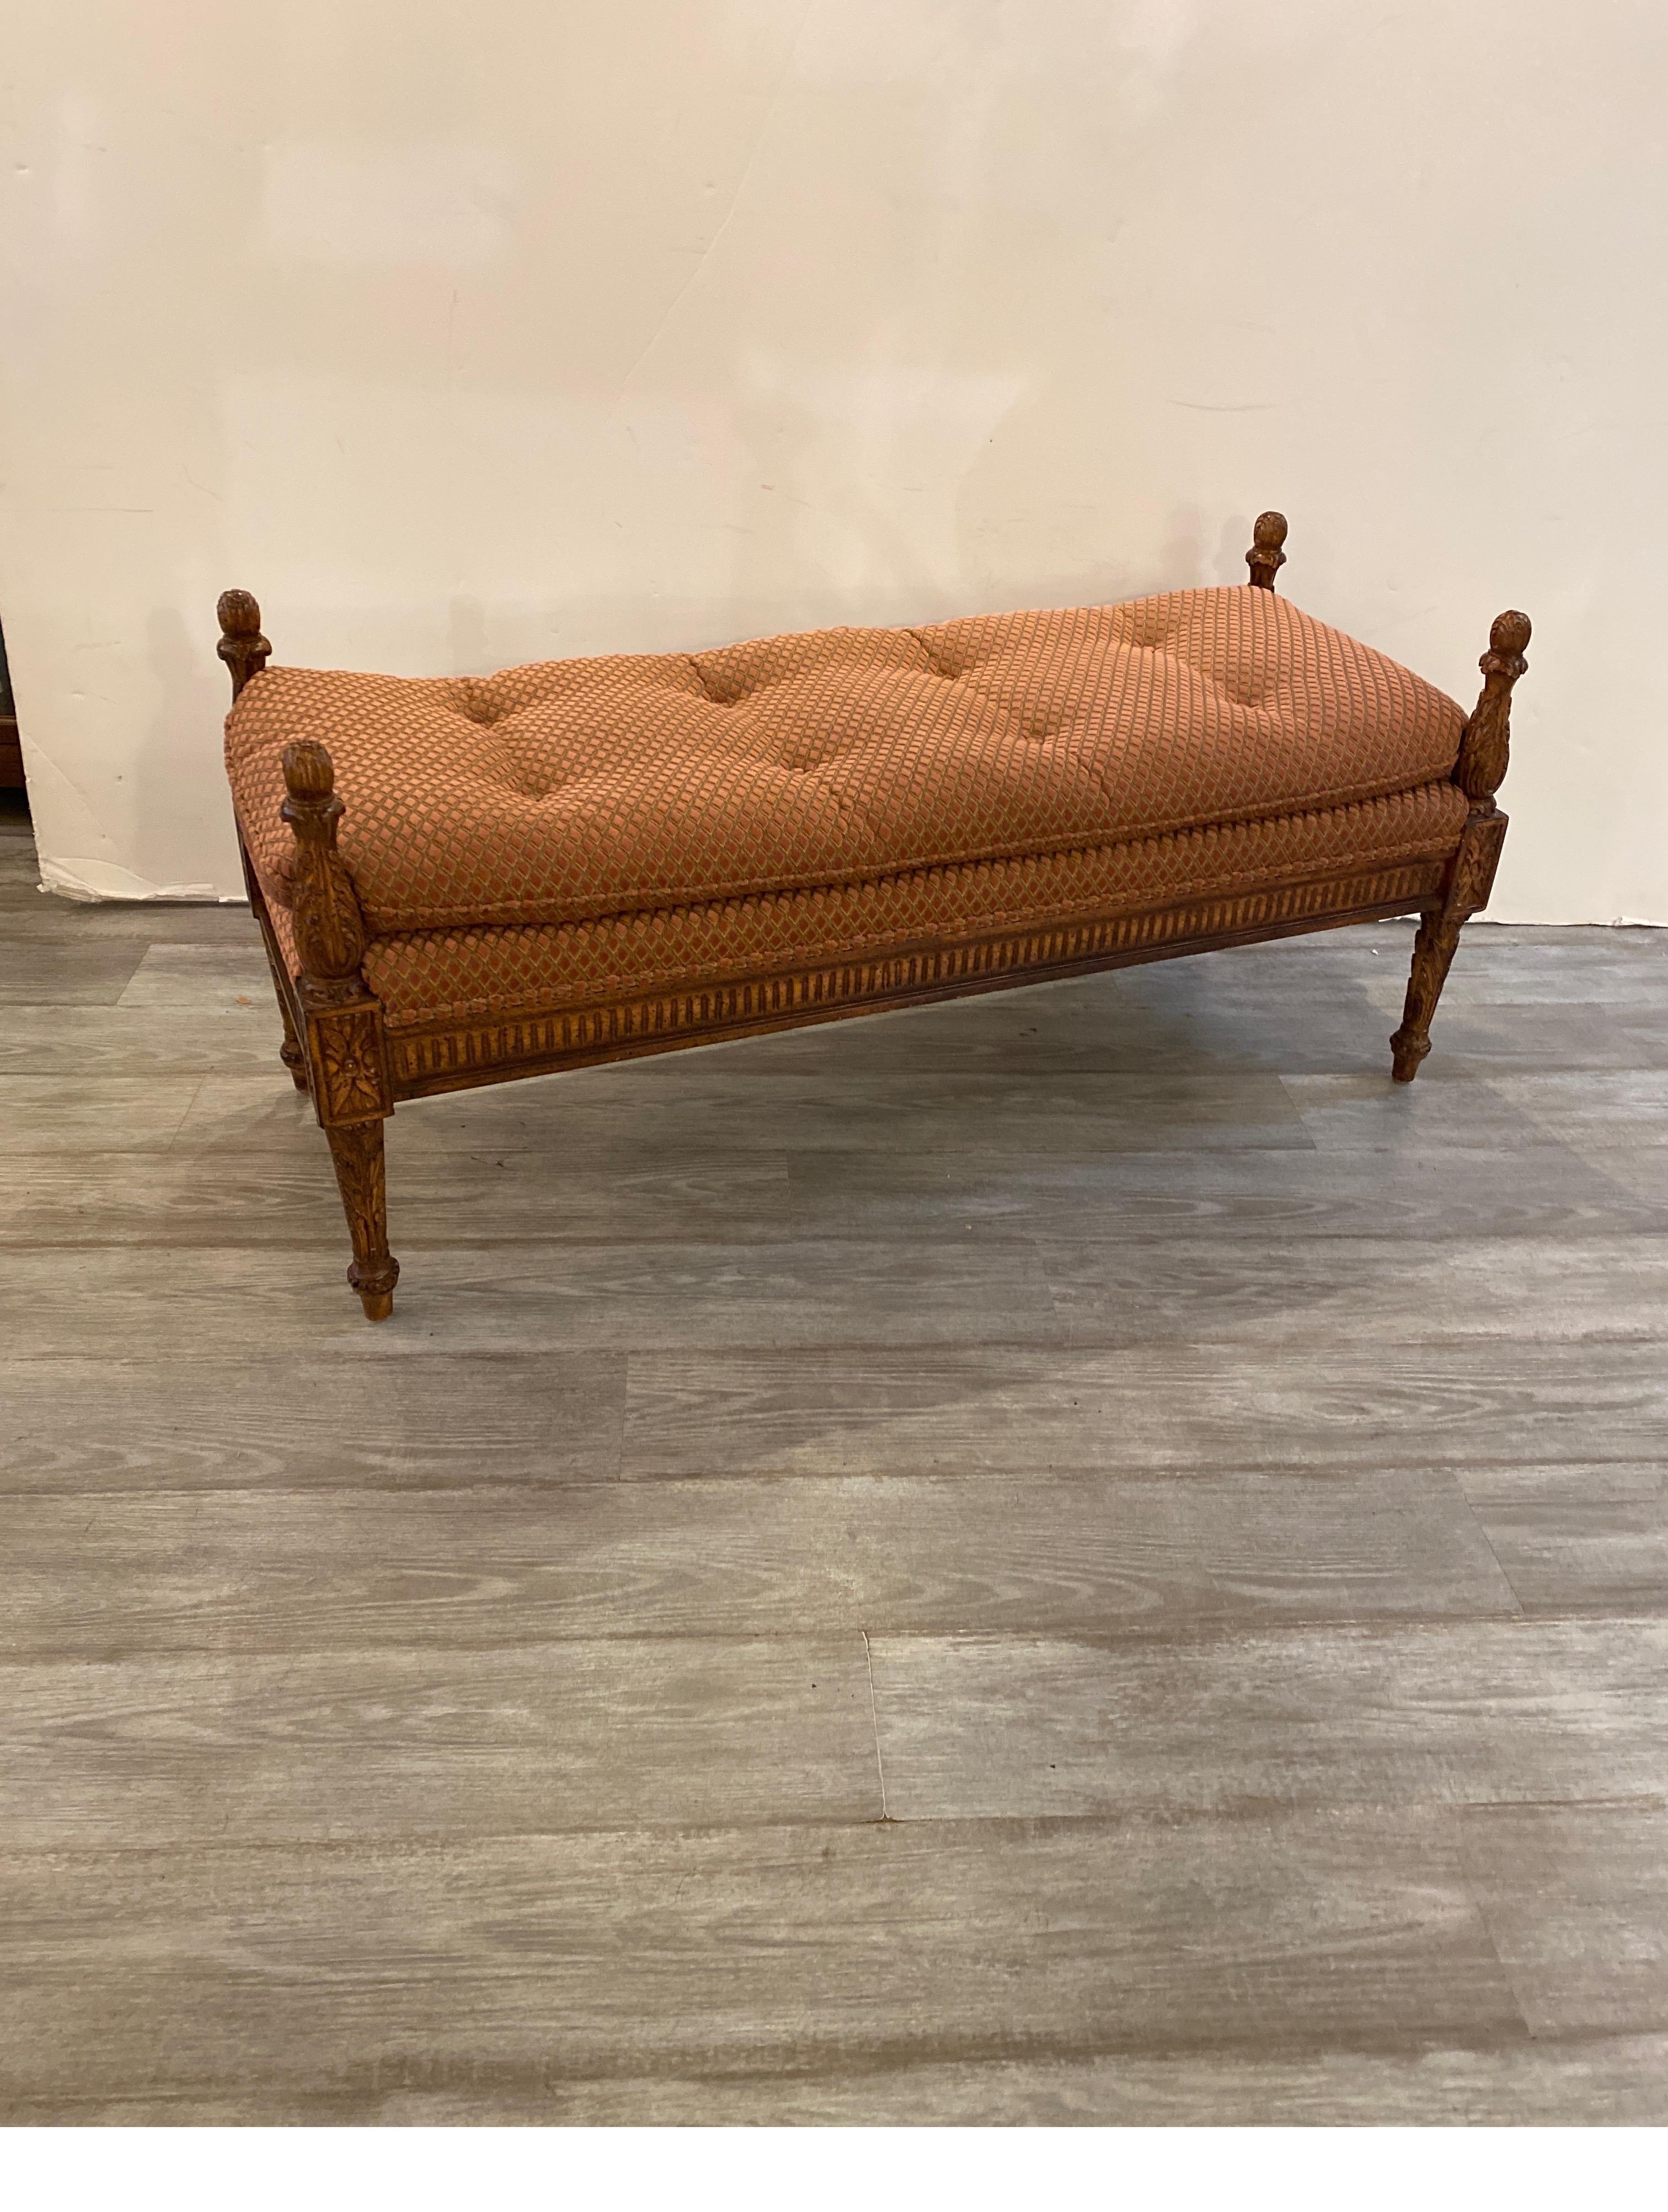 An Italian Provincial upholstered bench. The carved frame with a lighter wood color with diamond chenille fabric, with a down and feather pillow topped buttoned cushion.